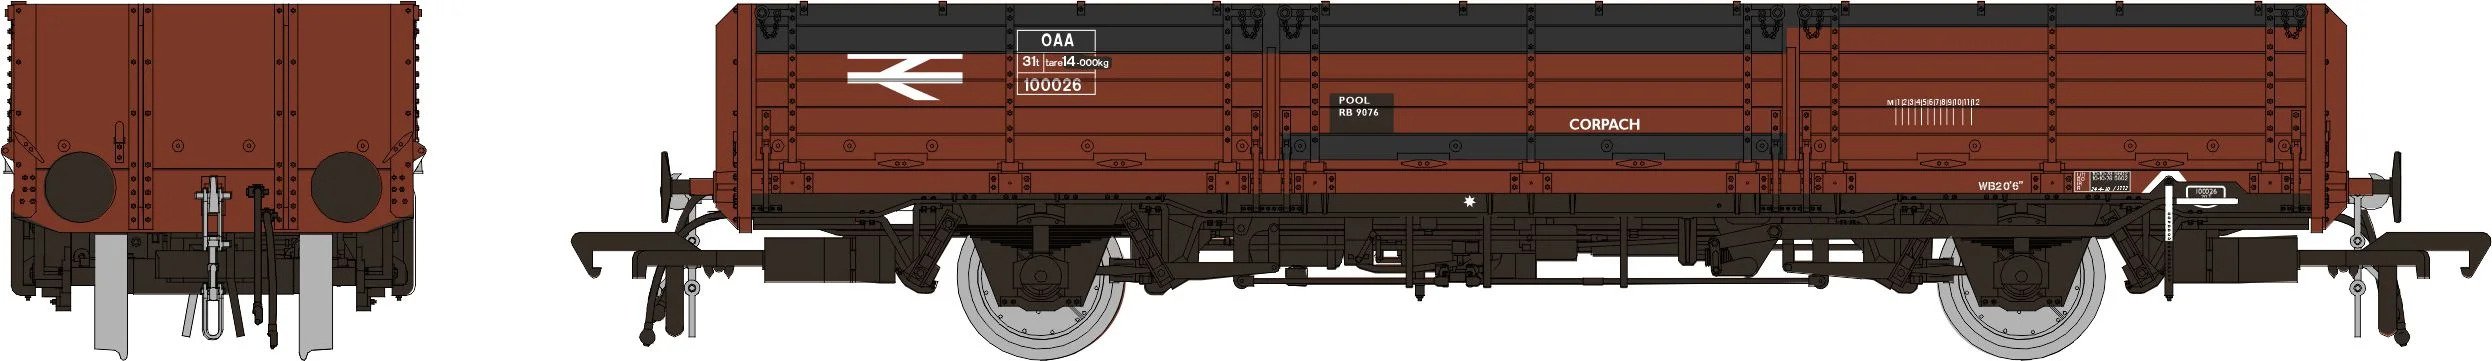 Rapido Trains 915007 OAA No. 100026, BR bauxite, Corpach pool, patched finish